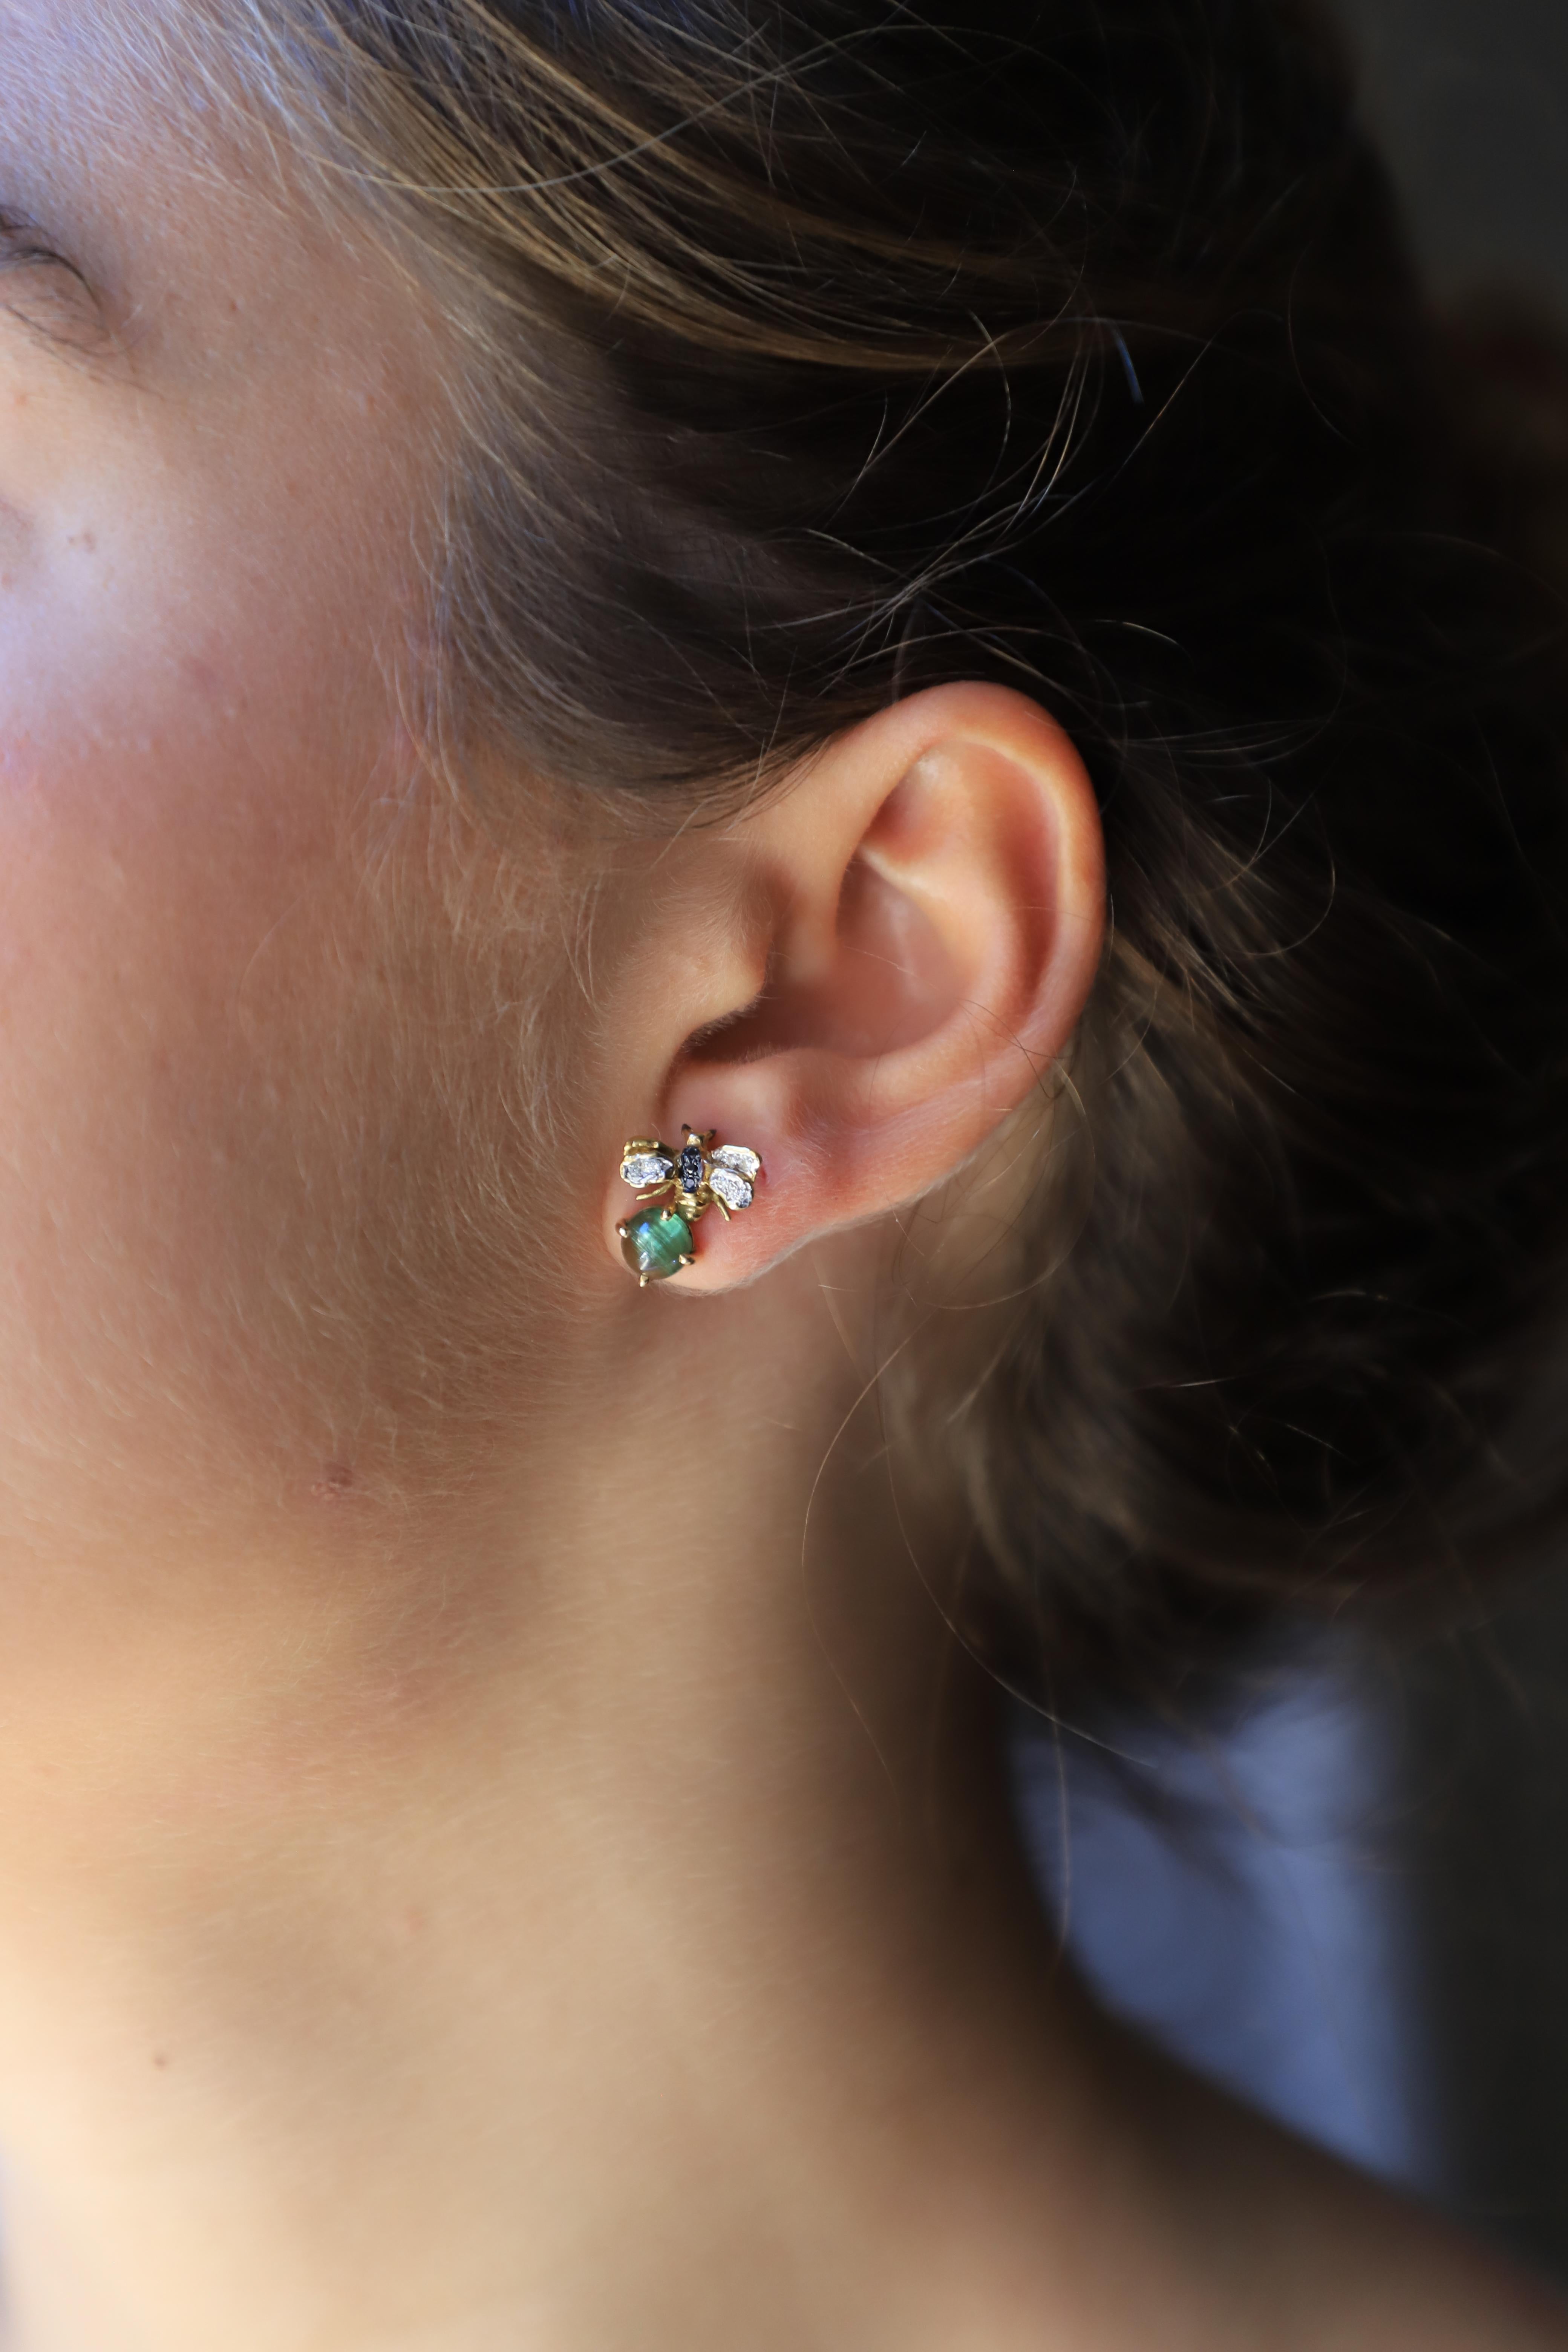 Rossella Ugolini Design Collection, a pair of Little Bees Stud Earrings handcrafted in 18 Karats Yellow Gold and adorned with a beautiful green Tourmaline stone, 0.10 carats White Diamonds and 0.06 karats deep Black Diamonds. 
Dimensions: 0.06 in.